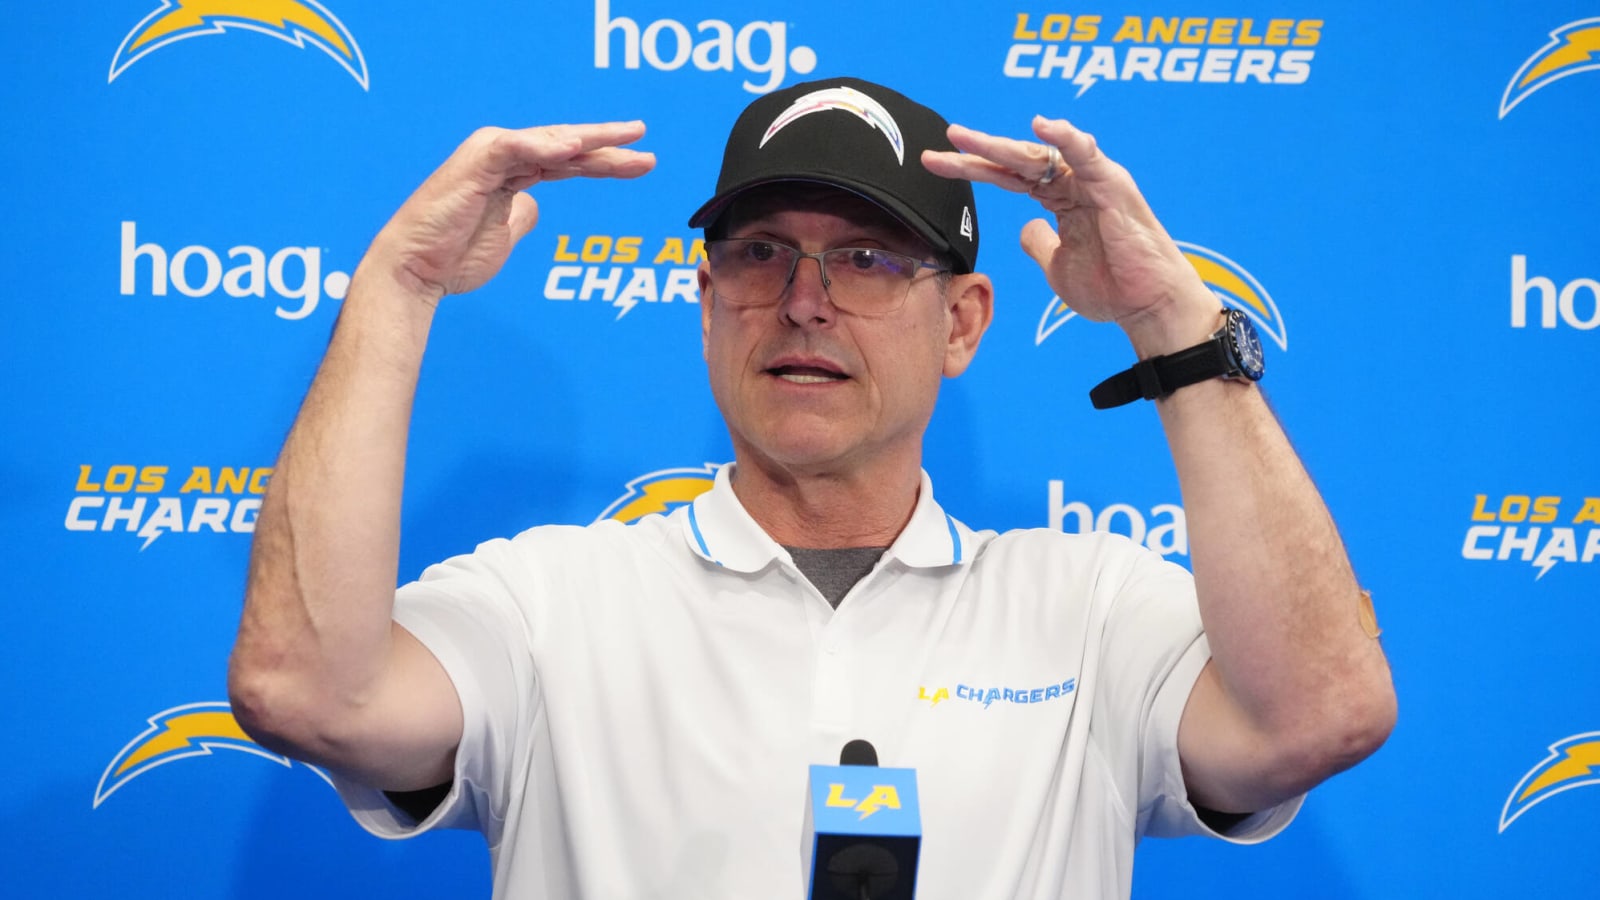 NFL insider reveals Chargers draft targets at 5th pick, Jim Harbaugh’s ‘favorite’ prospect